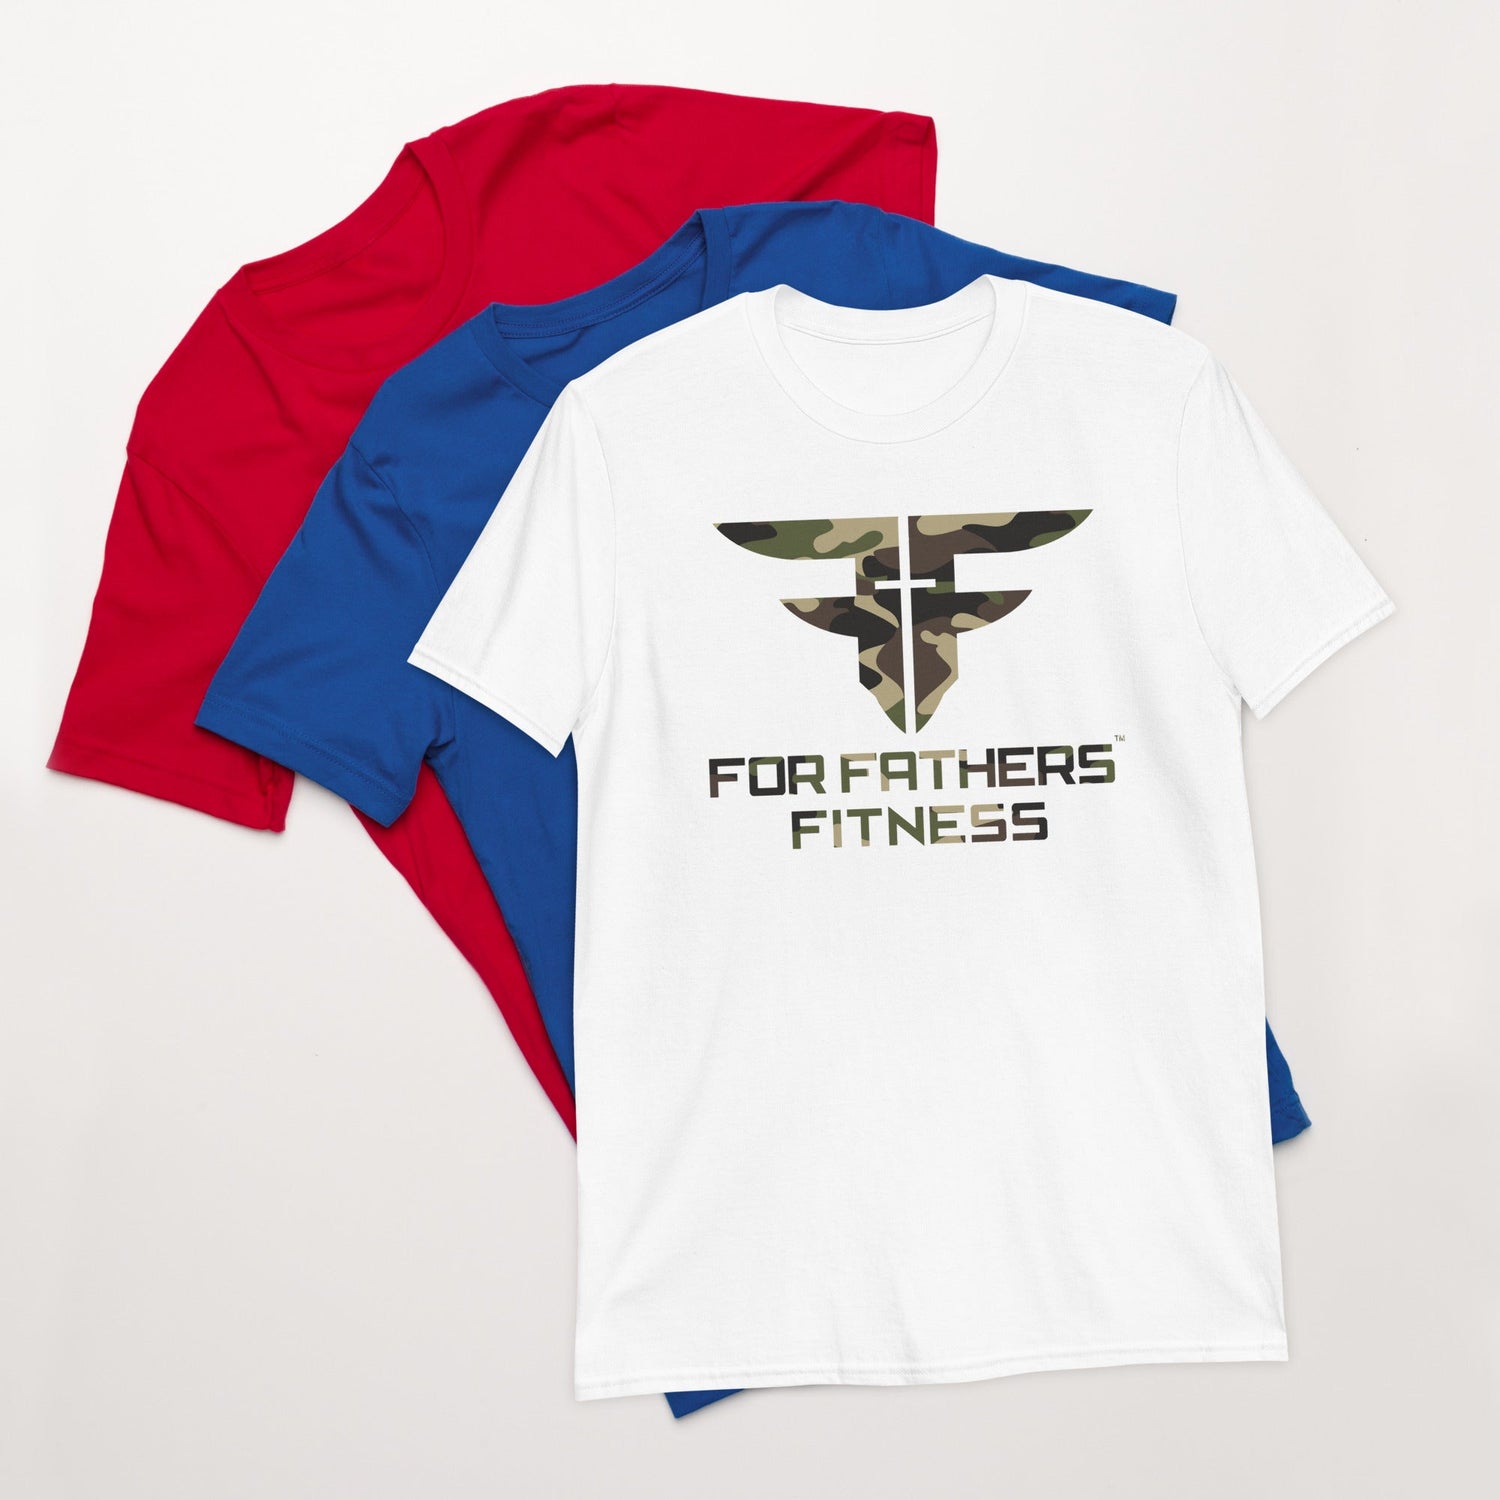 For Fathers Fitness T-Shirt Camo Logo - For Fathers Fitness